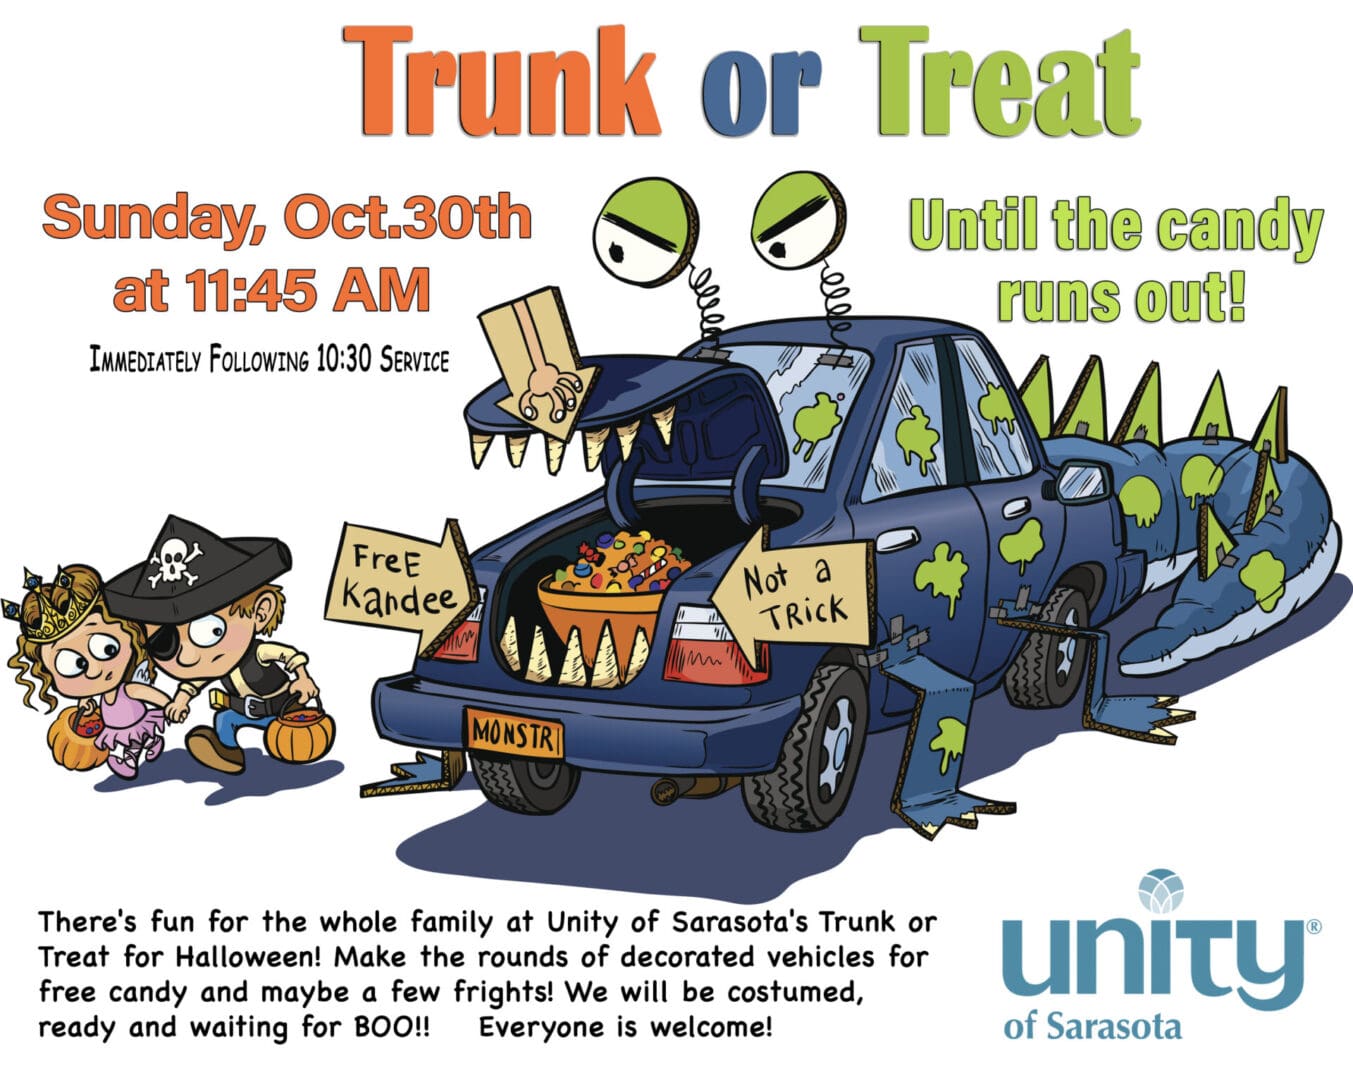 Trunk or Treat at Unity of Sarasota Oct 30th, 2022